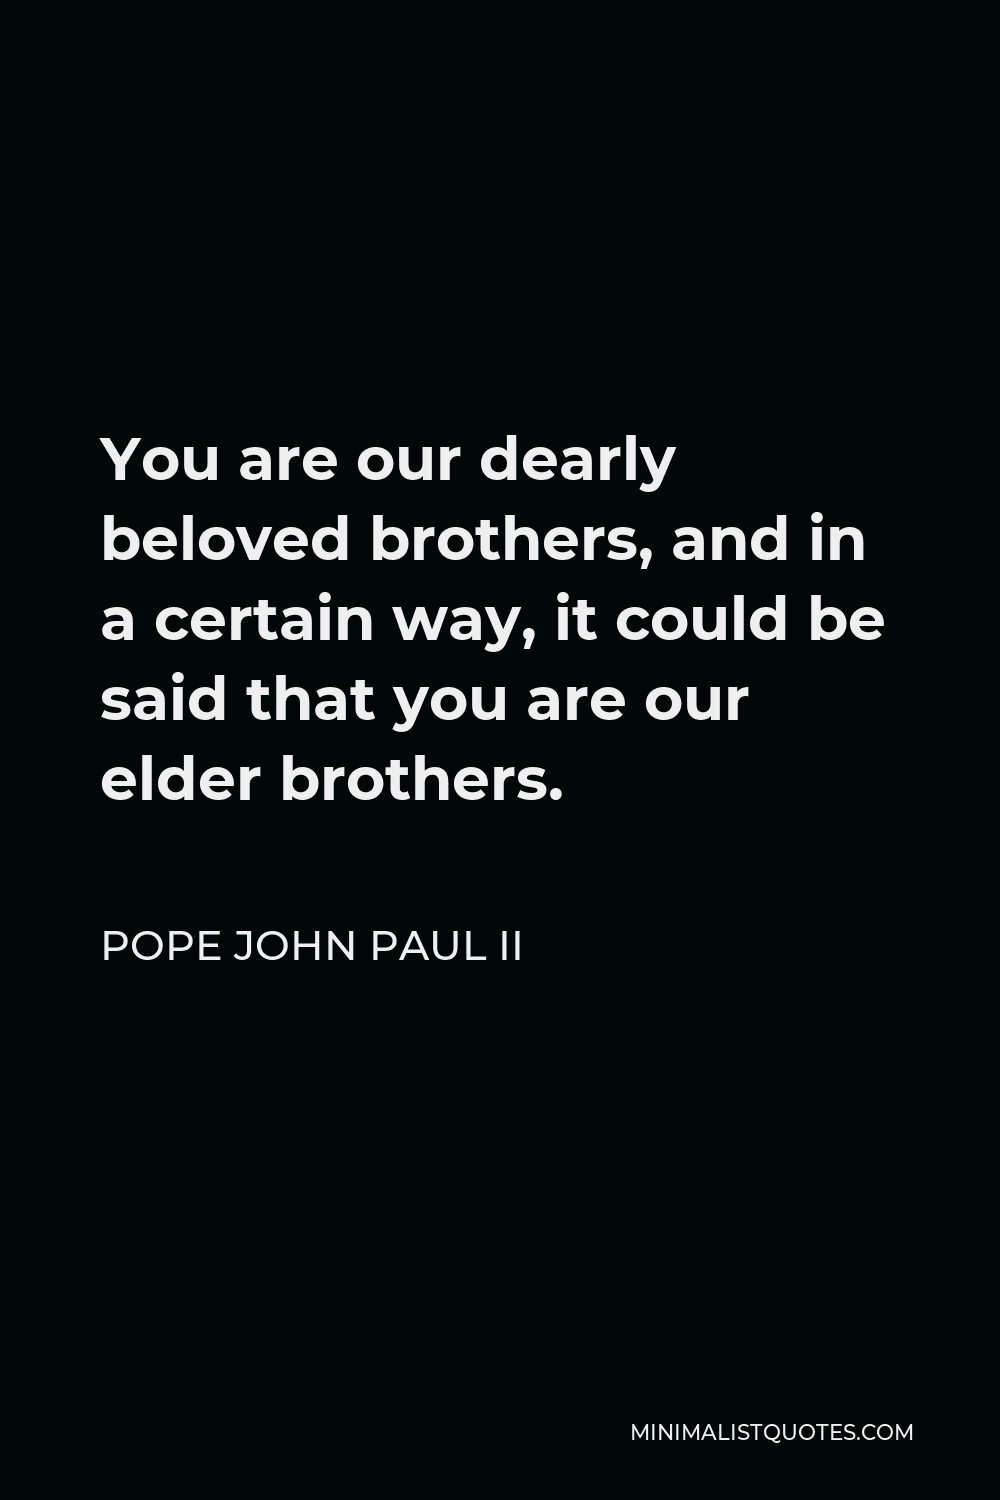 Pope John Paul II Quote - You are our dearly beloved brothers, and in a certain way, it could be said that you are our elder brothers.